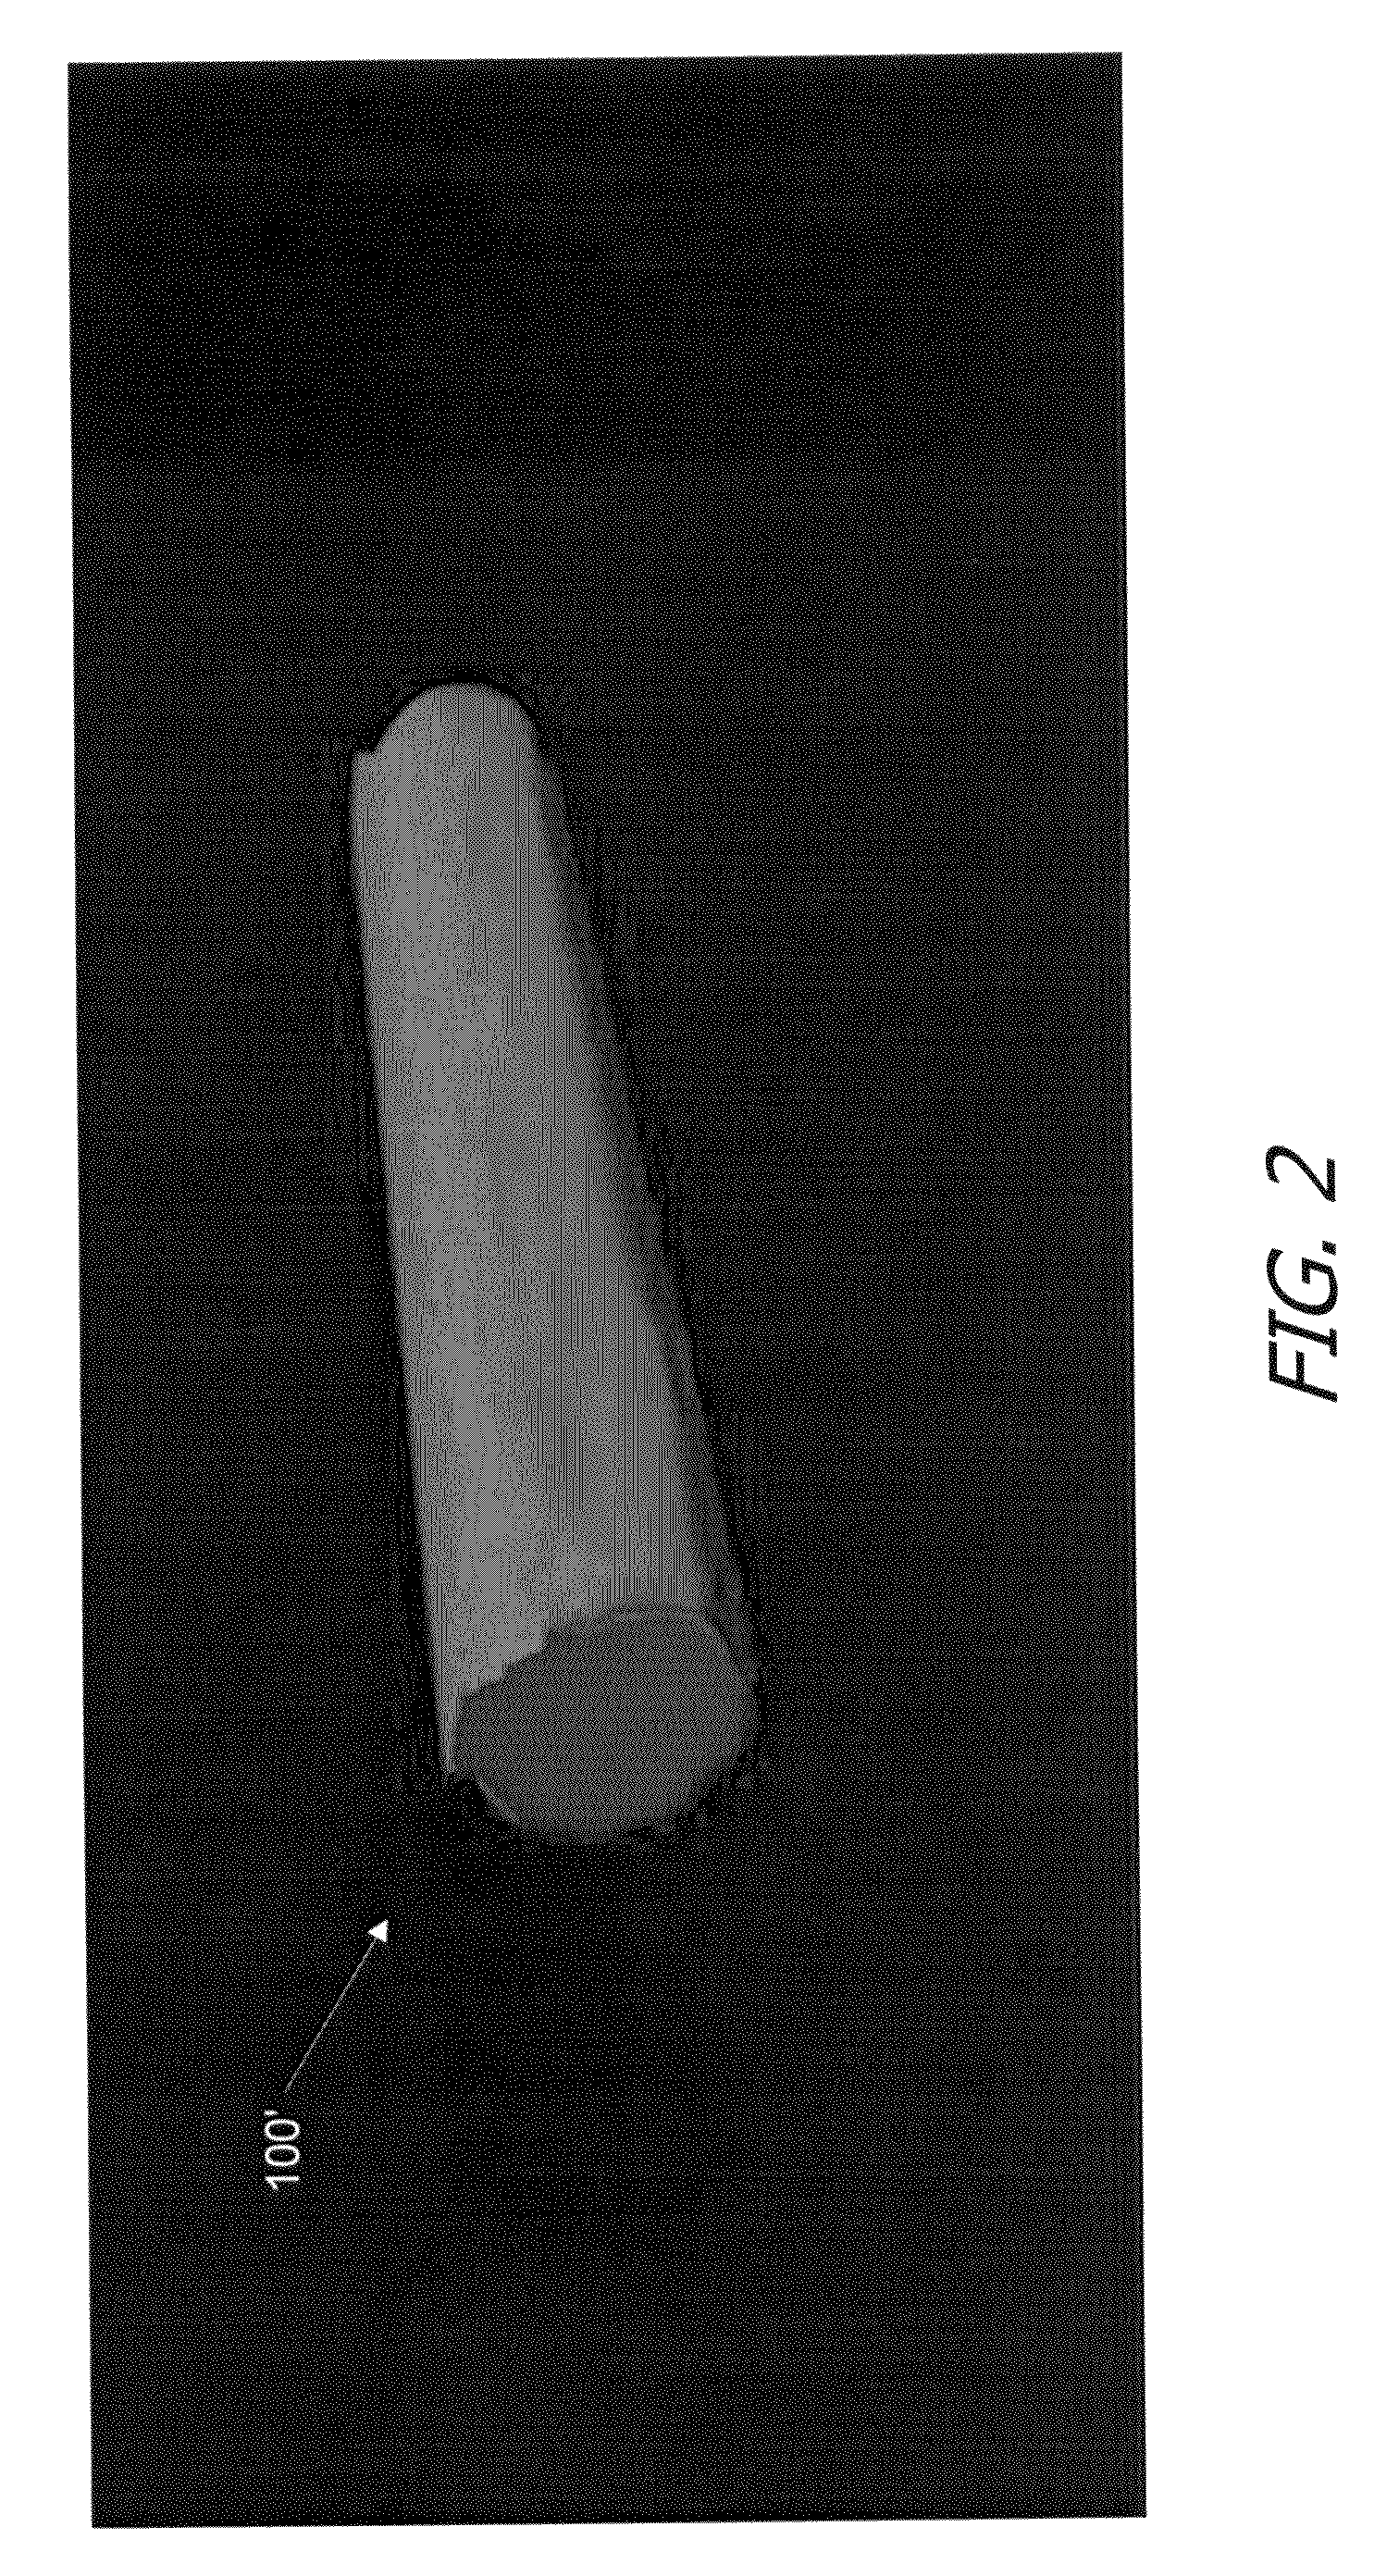 Method and apparatus for graphically defining surface normal maps